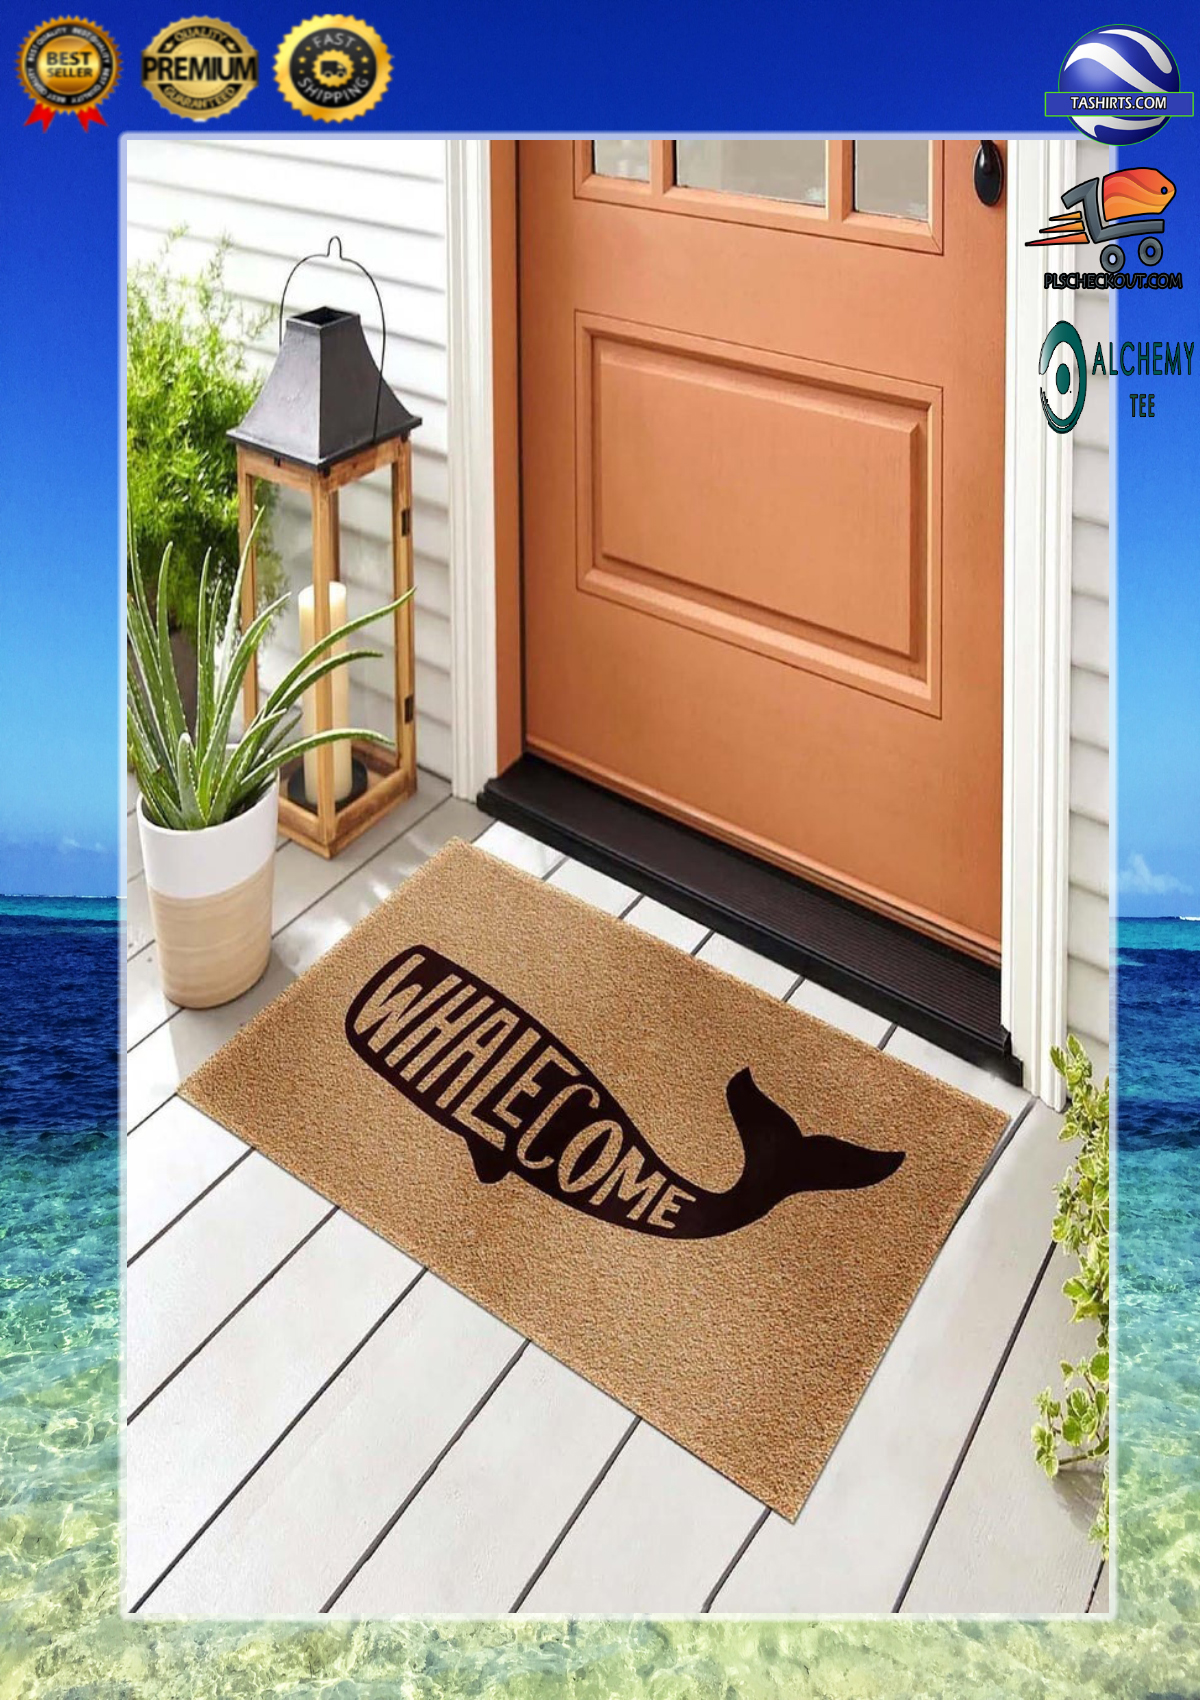 Whalecome whale doormat 2